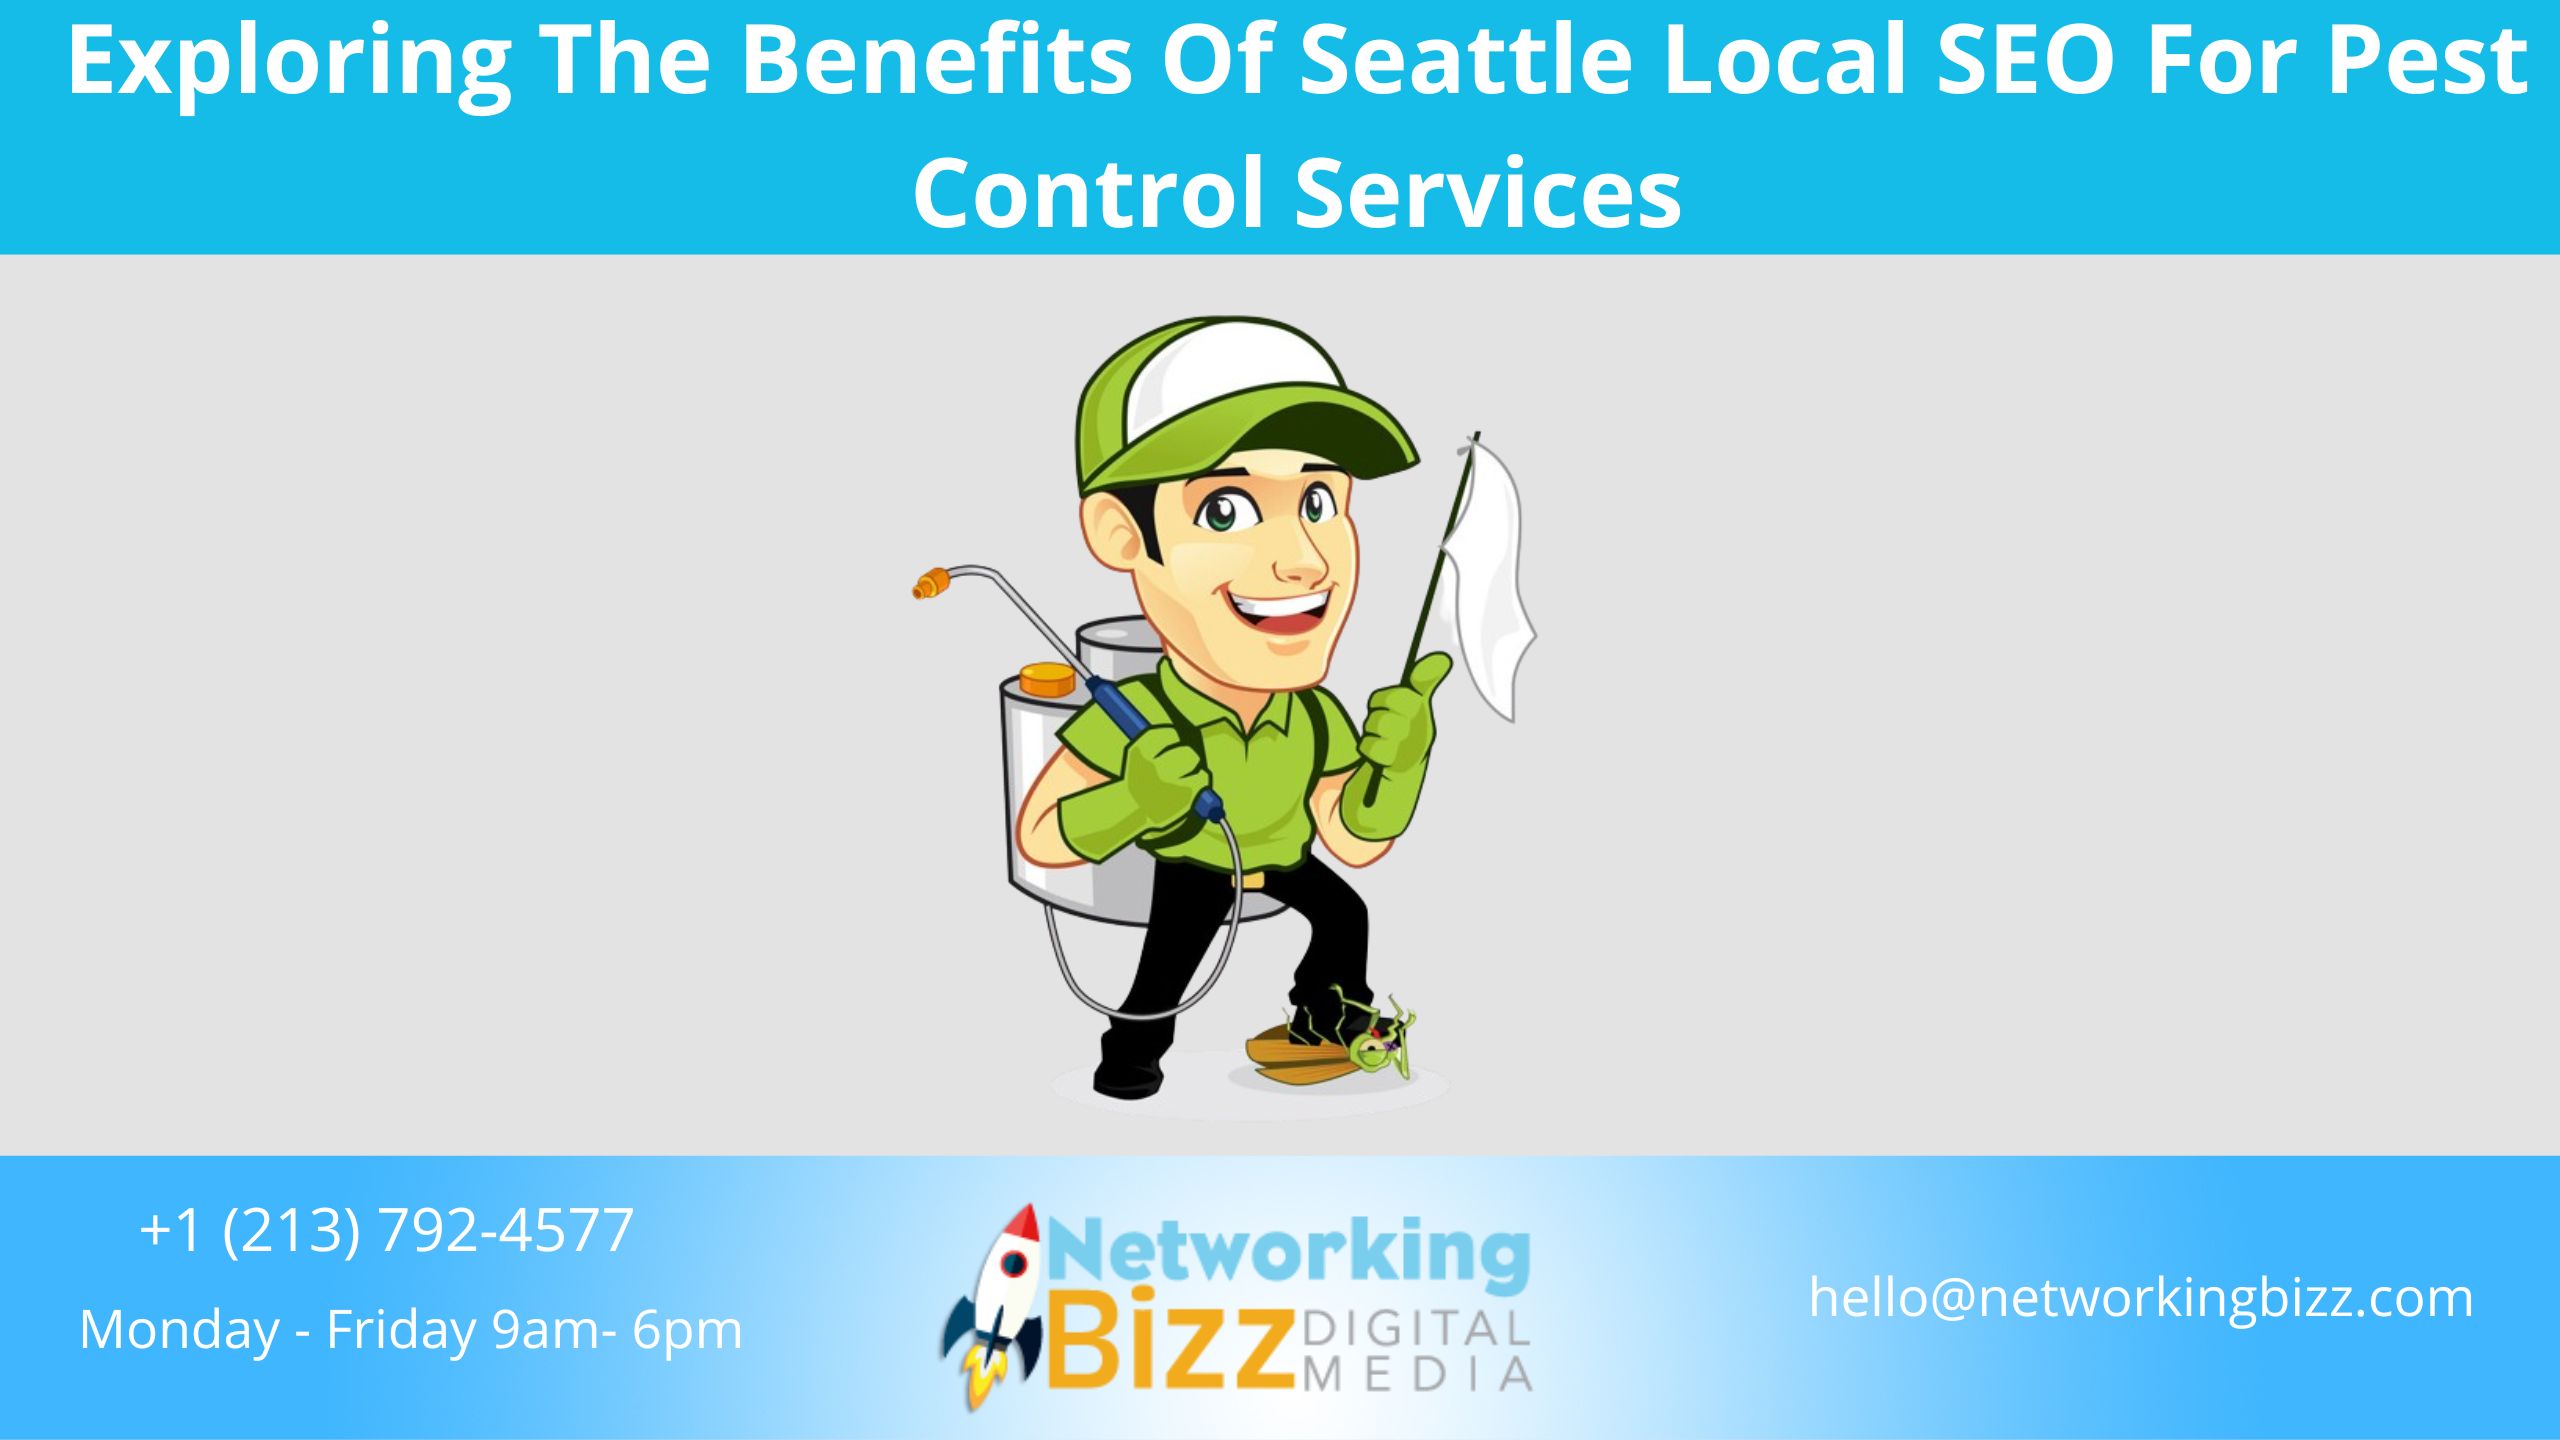 Exploring The Benefits Of Seattle Local SEO For Pest Control Services